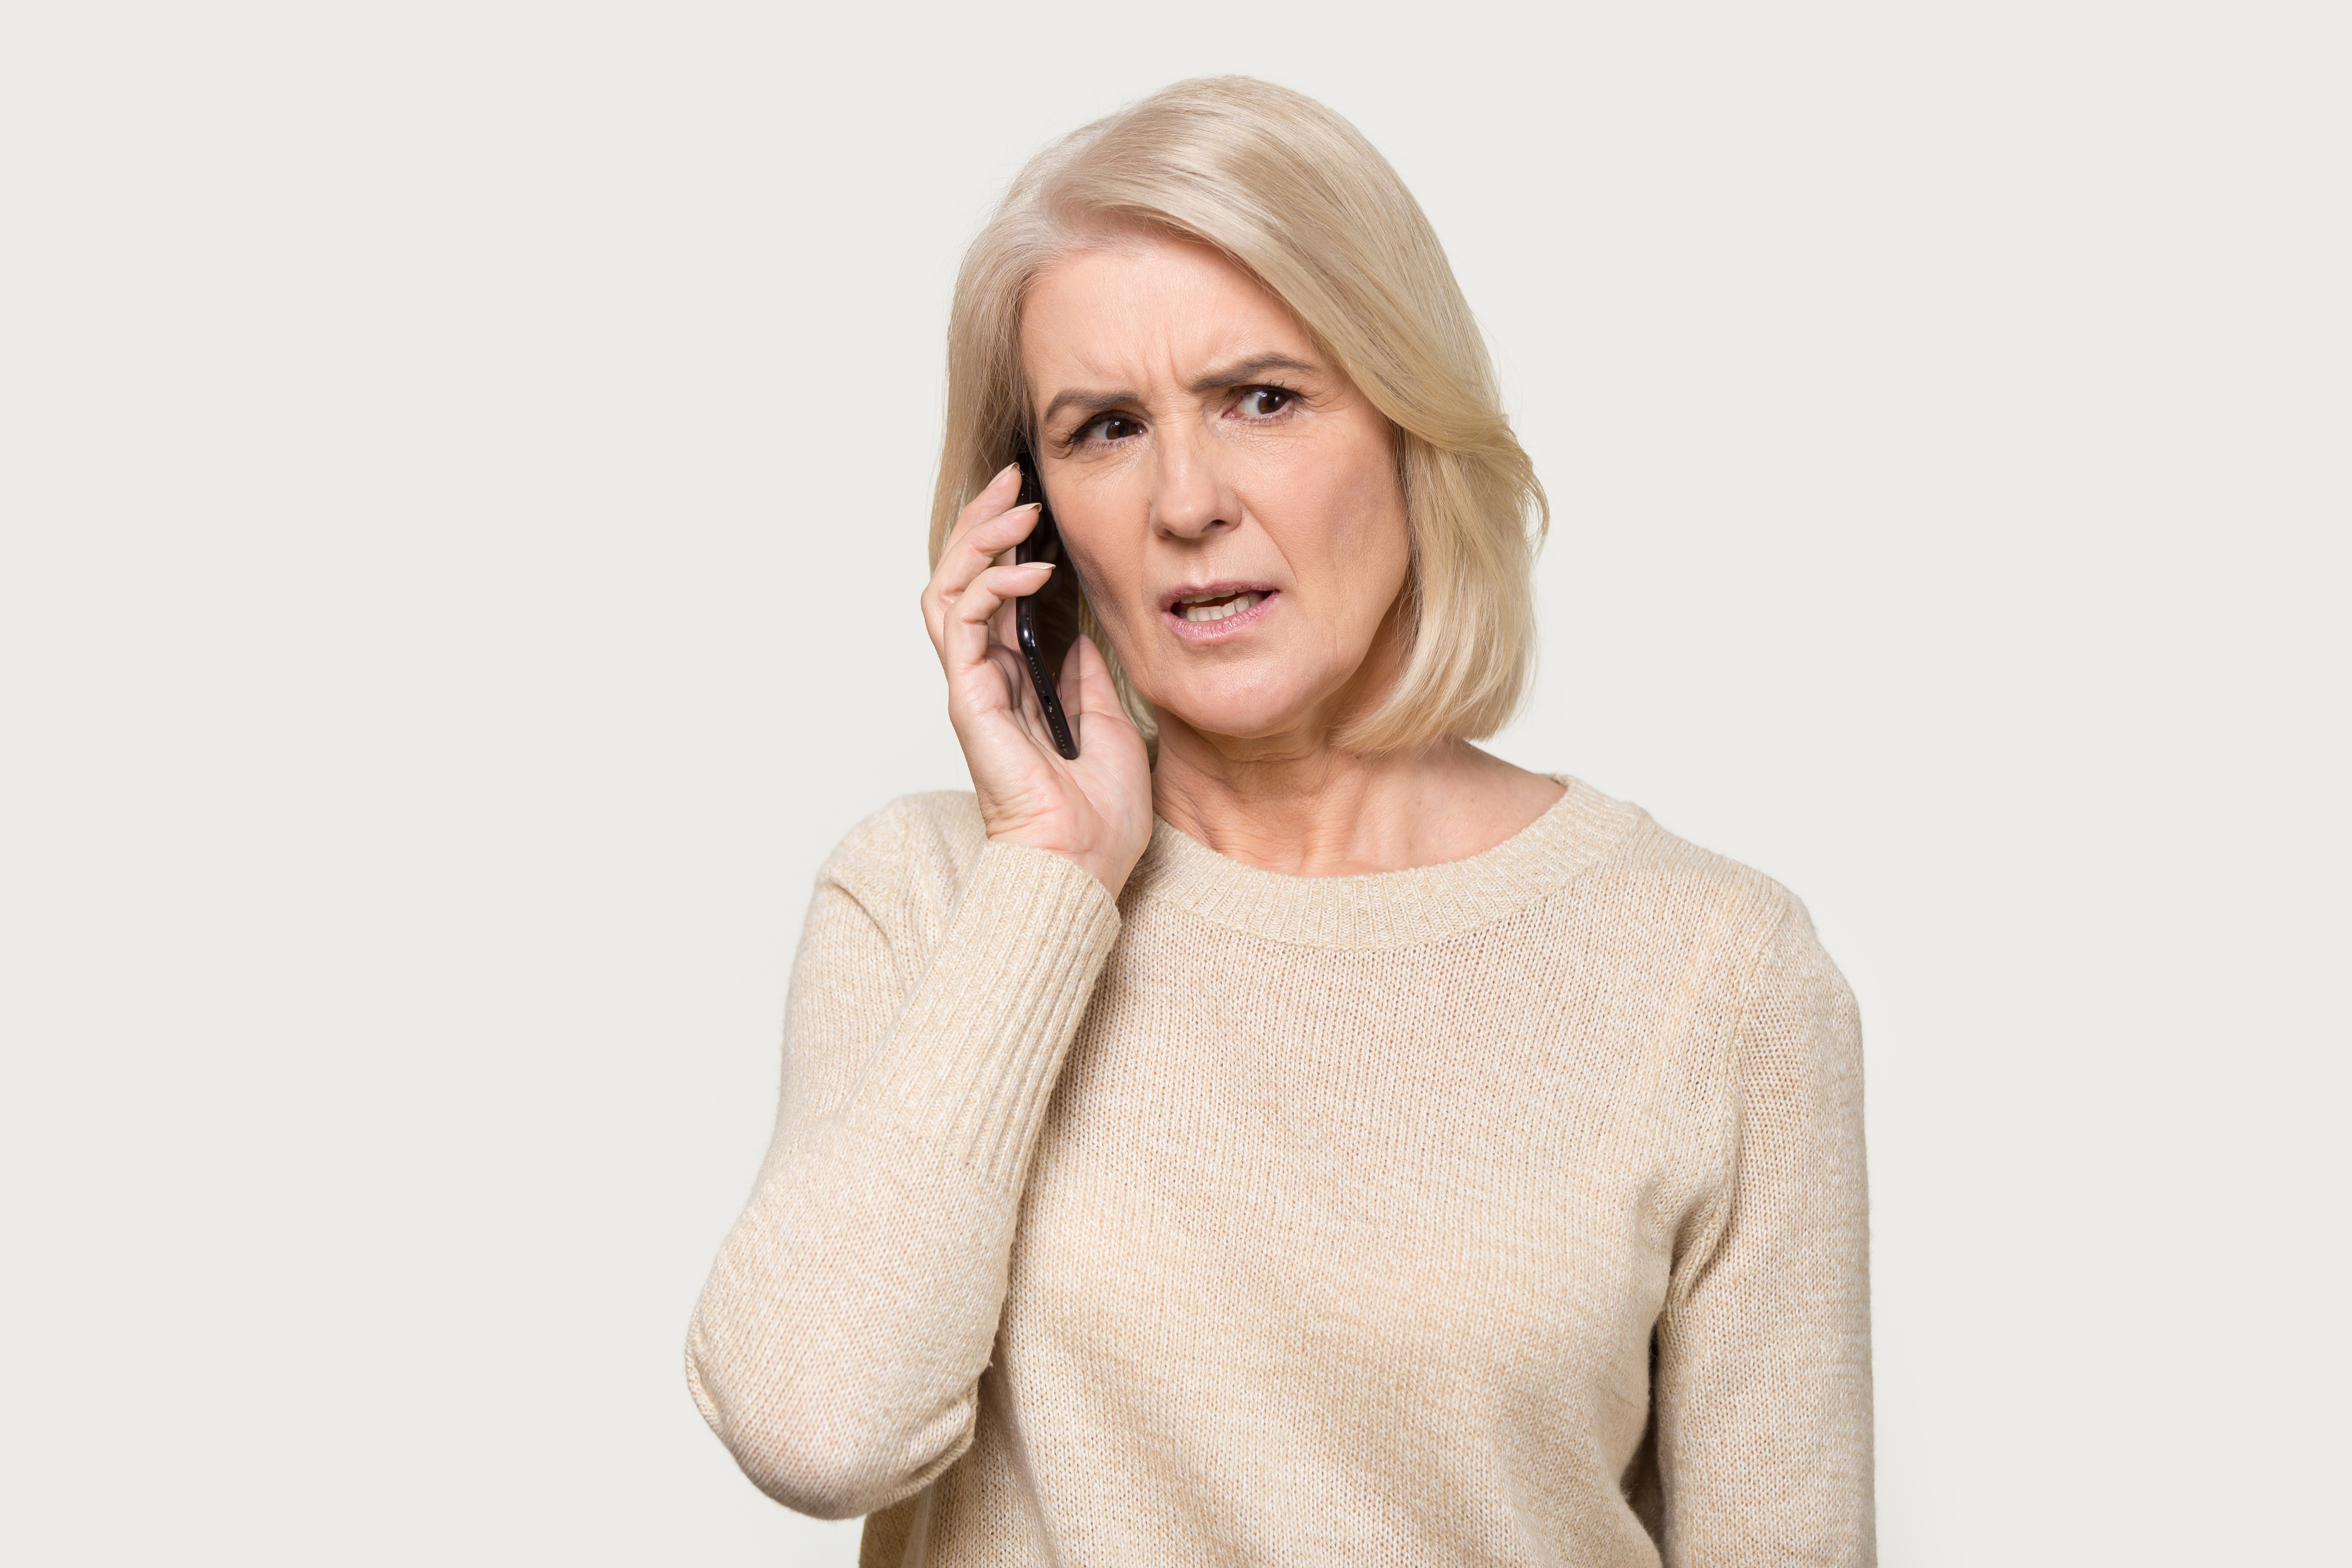 Woman looking annoyed on the phone | Source: Shutterstock